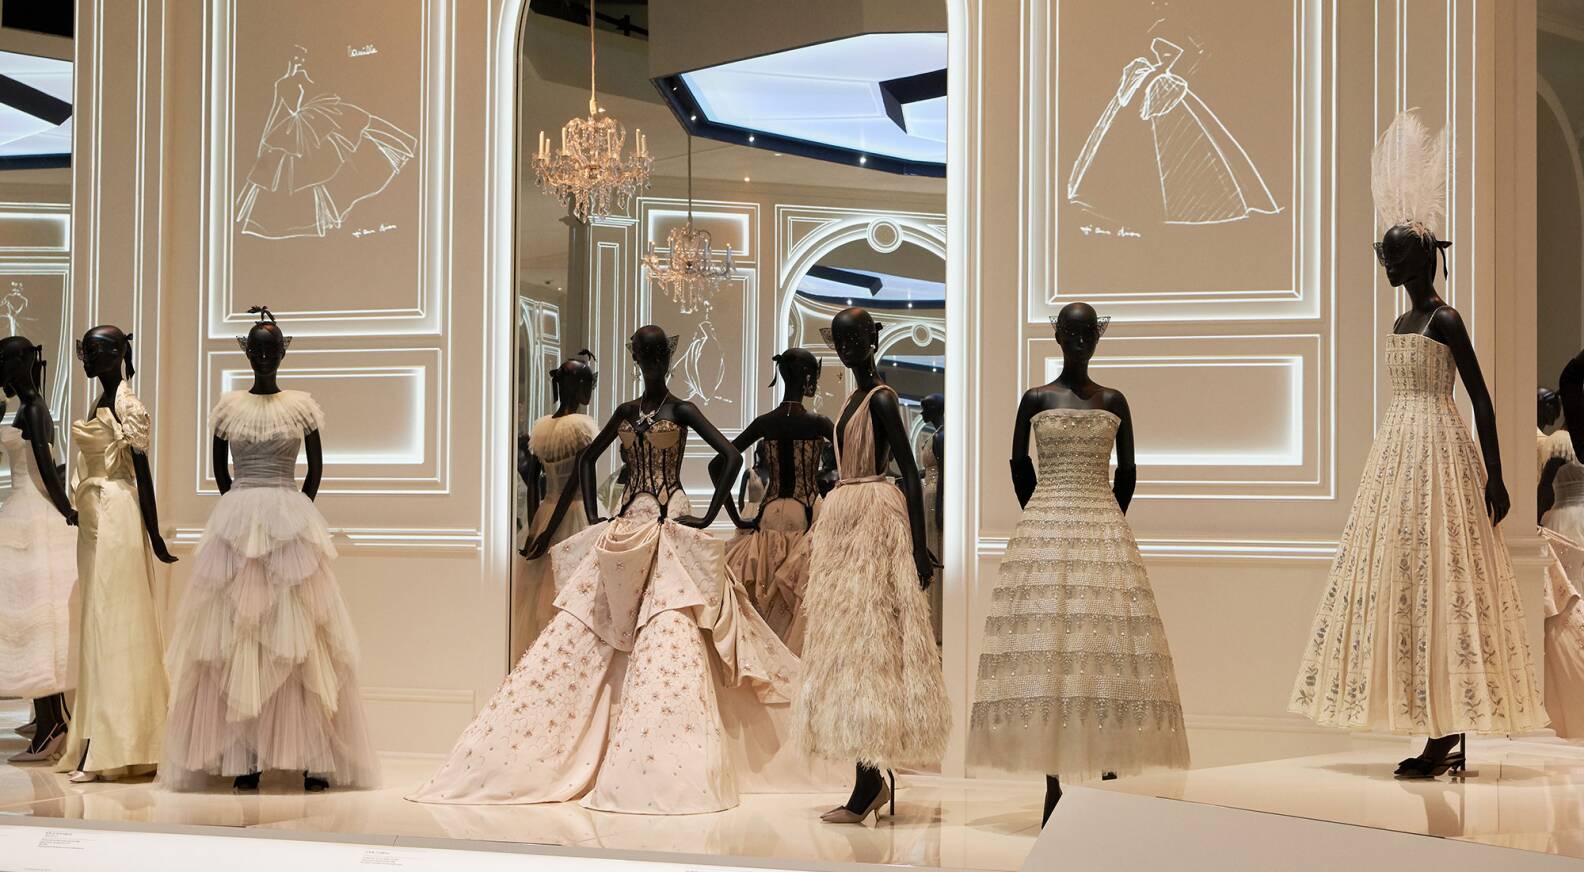 ‘Christian Dior, Designer of Dreams’ fashion exhibition can now be viewed virtually